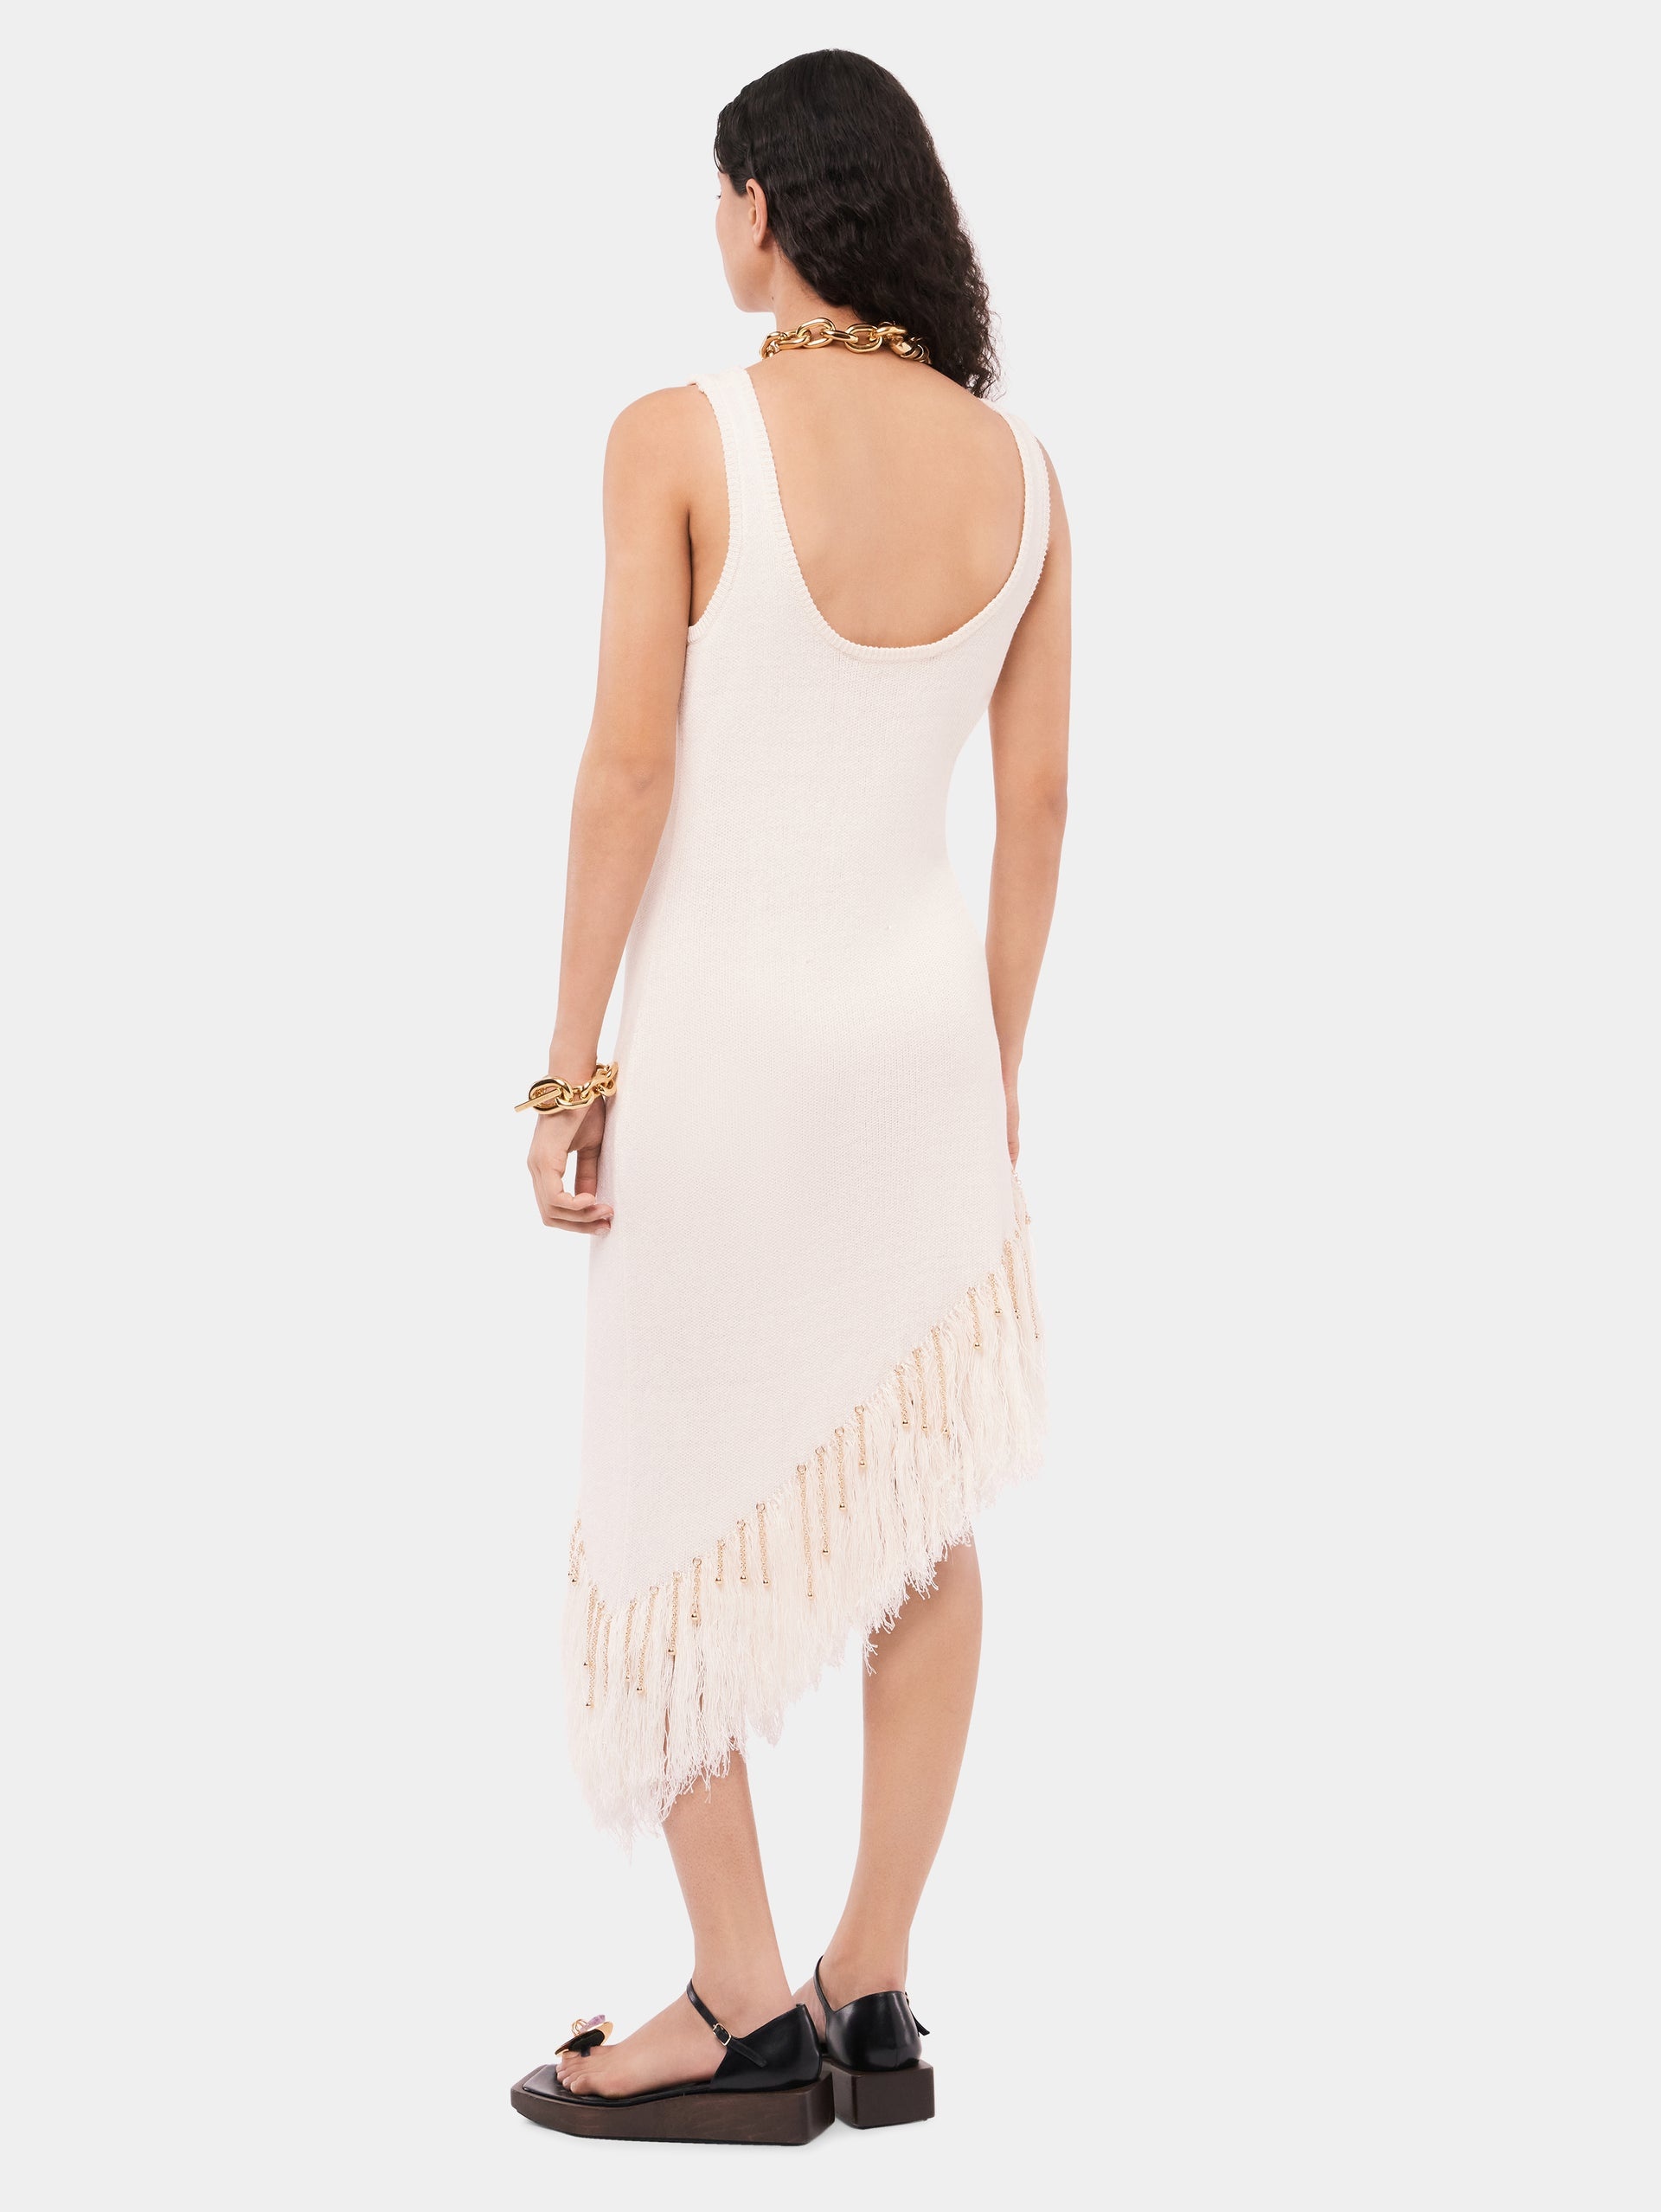 ASYMMETRICAL OFF WHITE WOVEN DRESS WITH KNITTED BEADS AND FEATHERS - 5